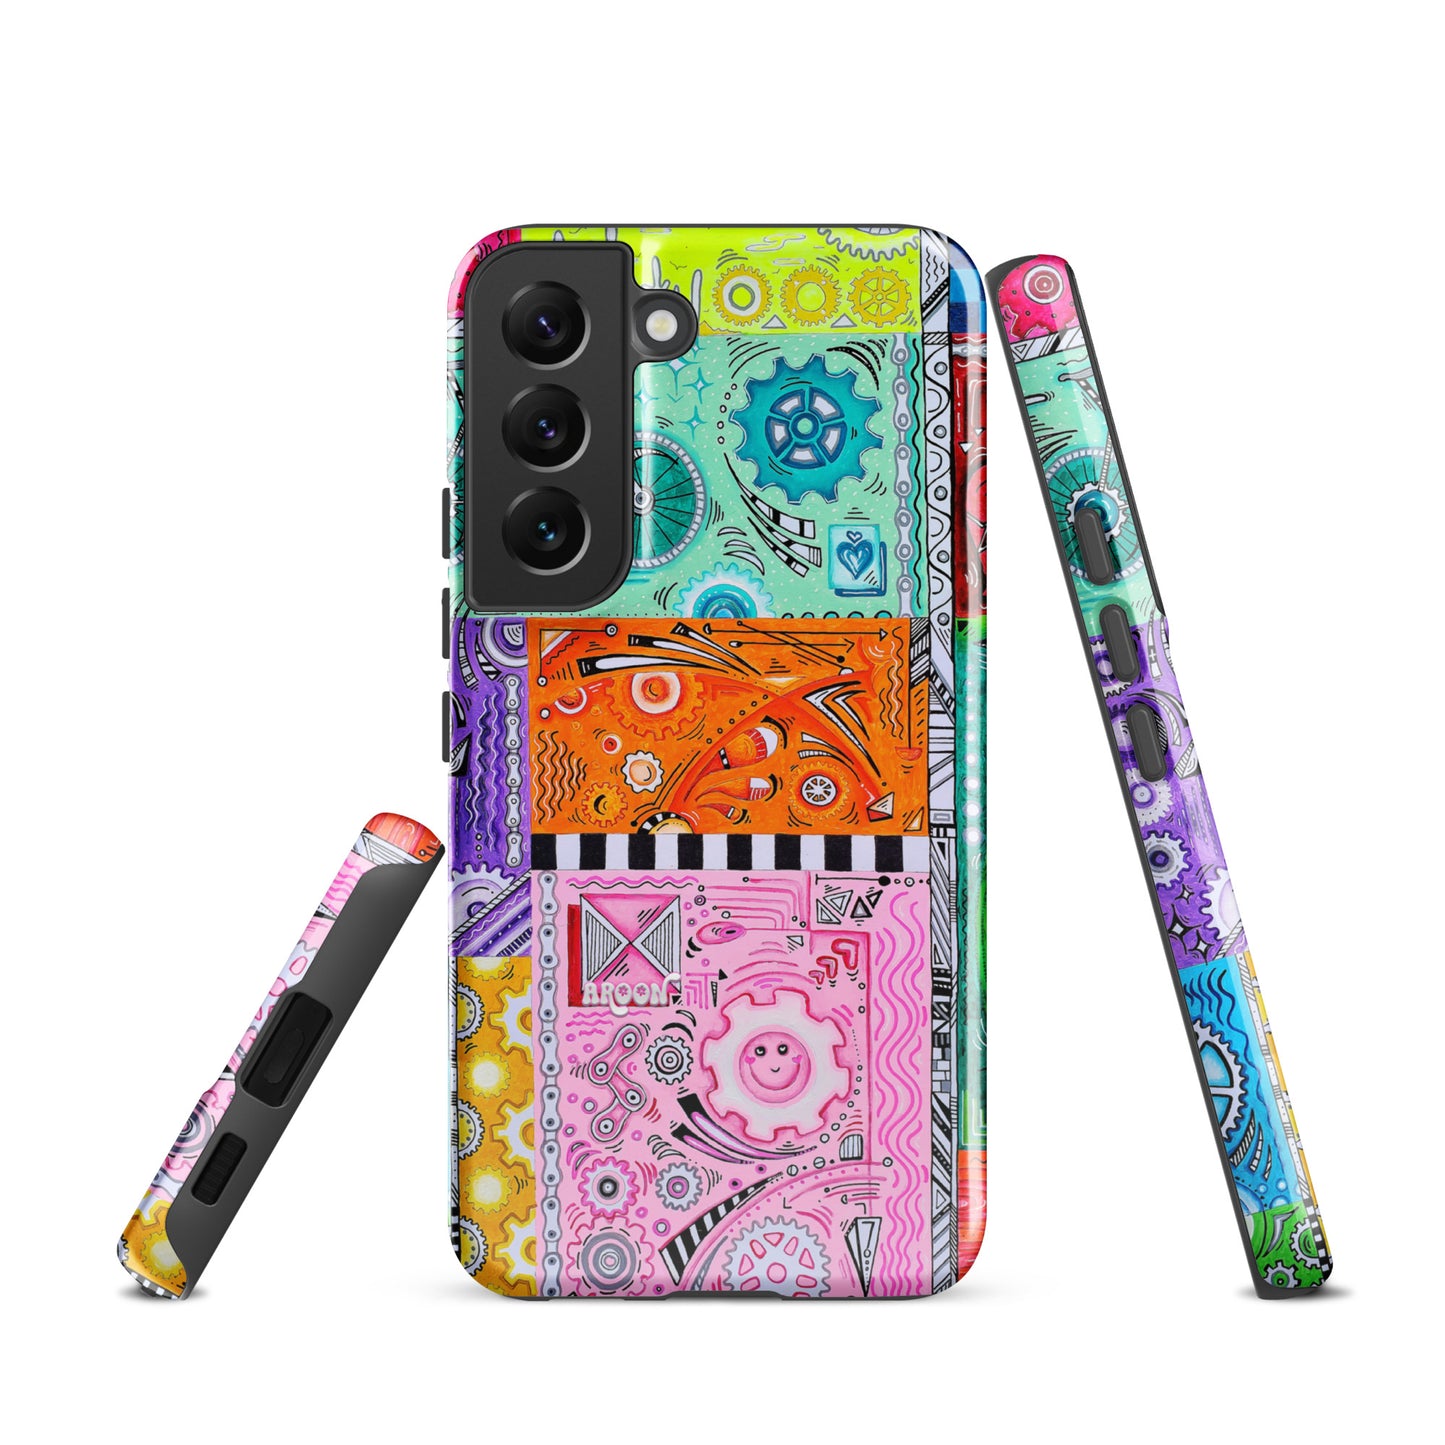 "Patchwork" Cycling Gears Doodle Design ~ Tough case for Samsung®